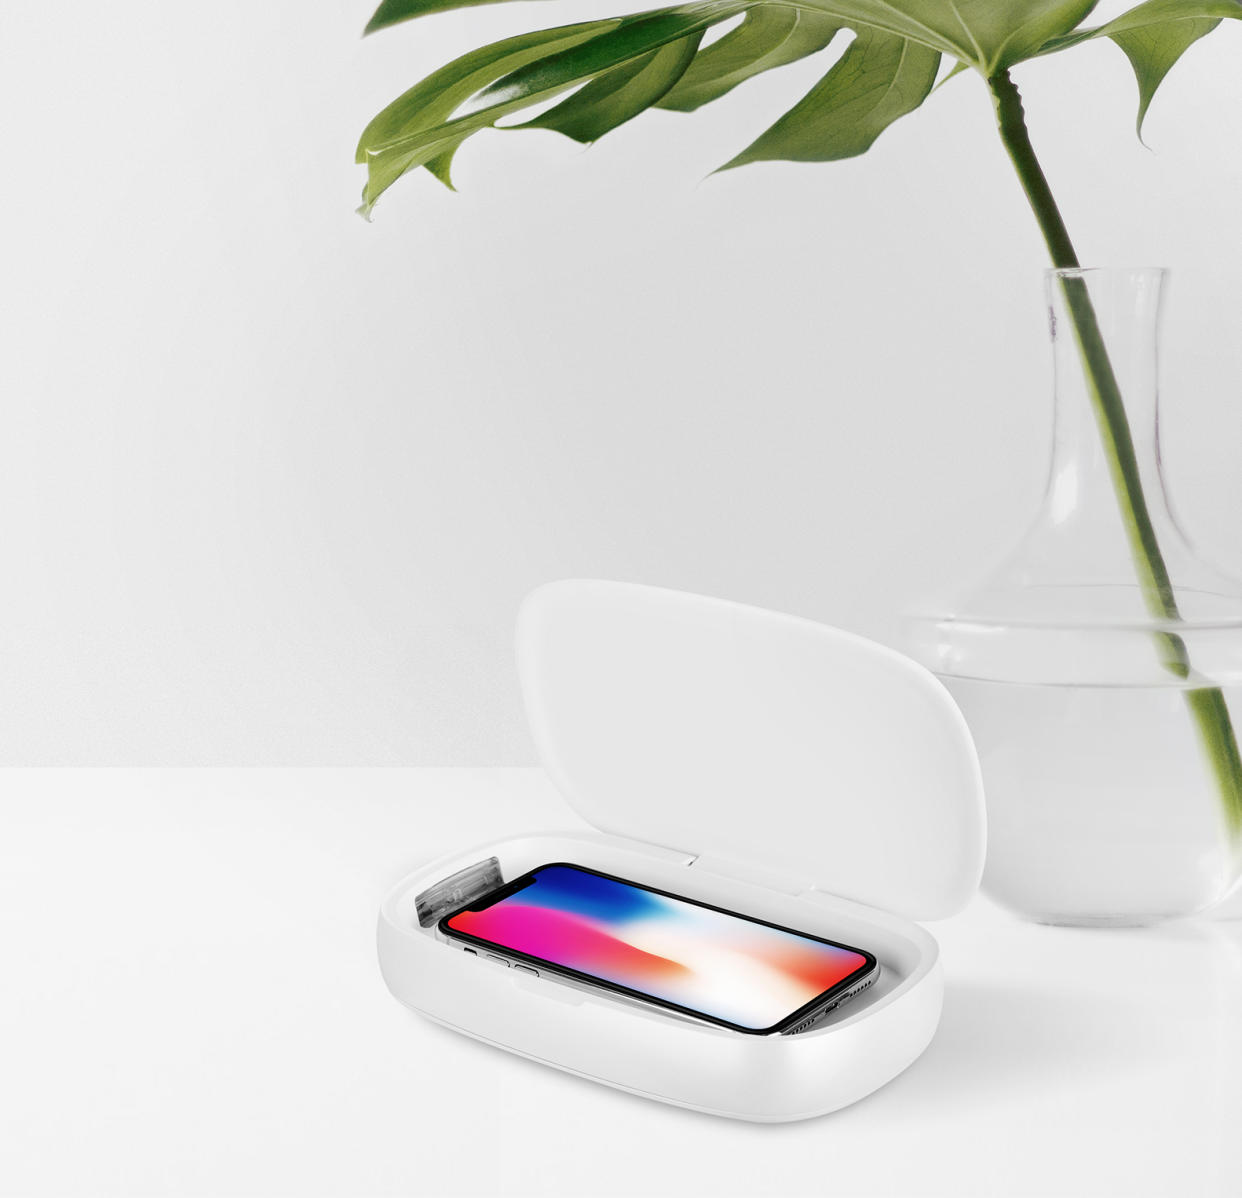 The Momax Q.Power is a UV box that doubles as a wireless charging pad when you put your phone on its cover. (PHOTO: Momax)